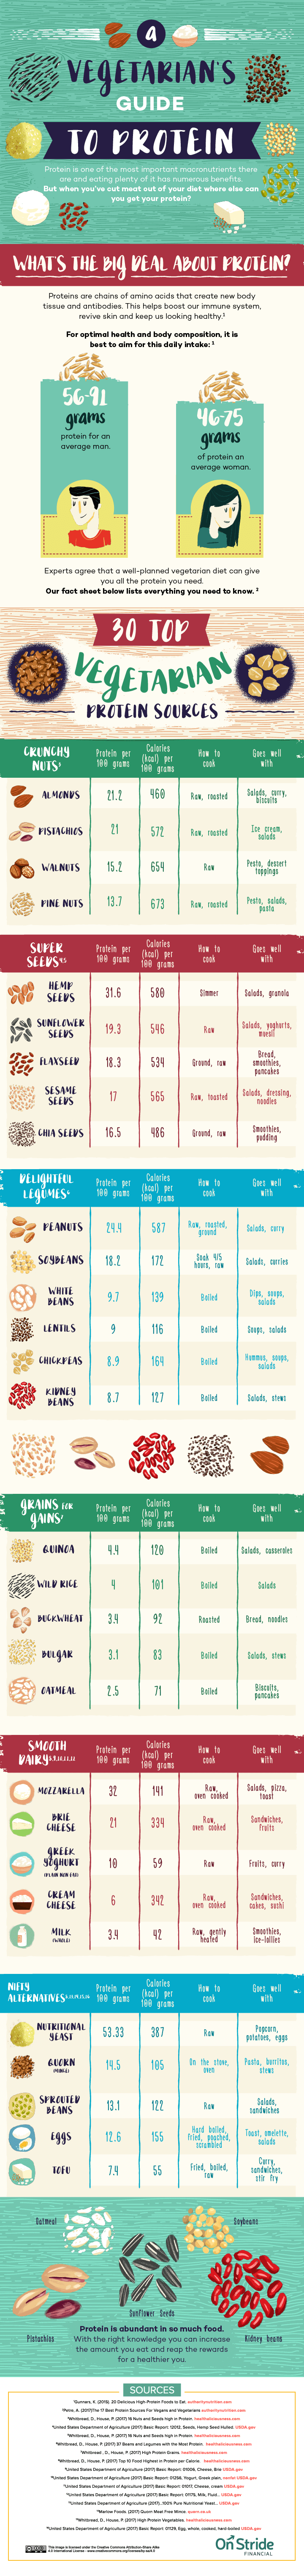 A-vegetarians-guide-to-protein